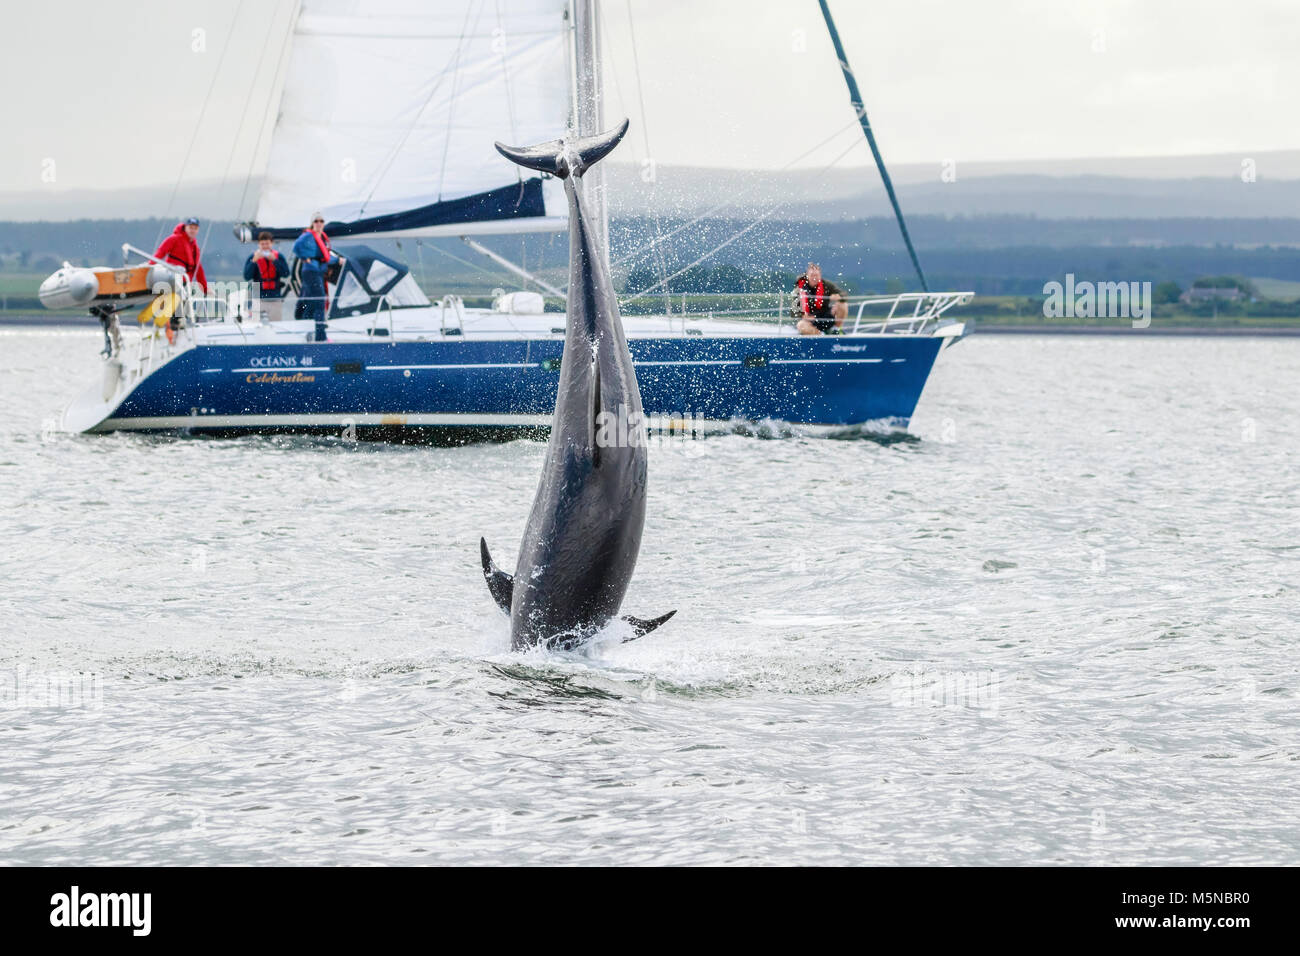 wild dolphin breaching in front of a boat while hunting for migrating atlantic salmon. Stock Photo